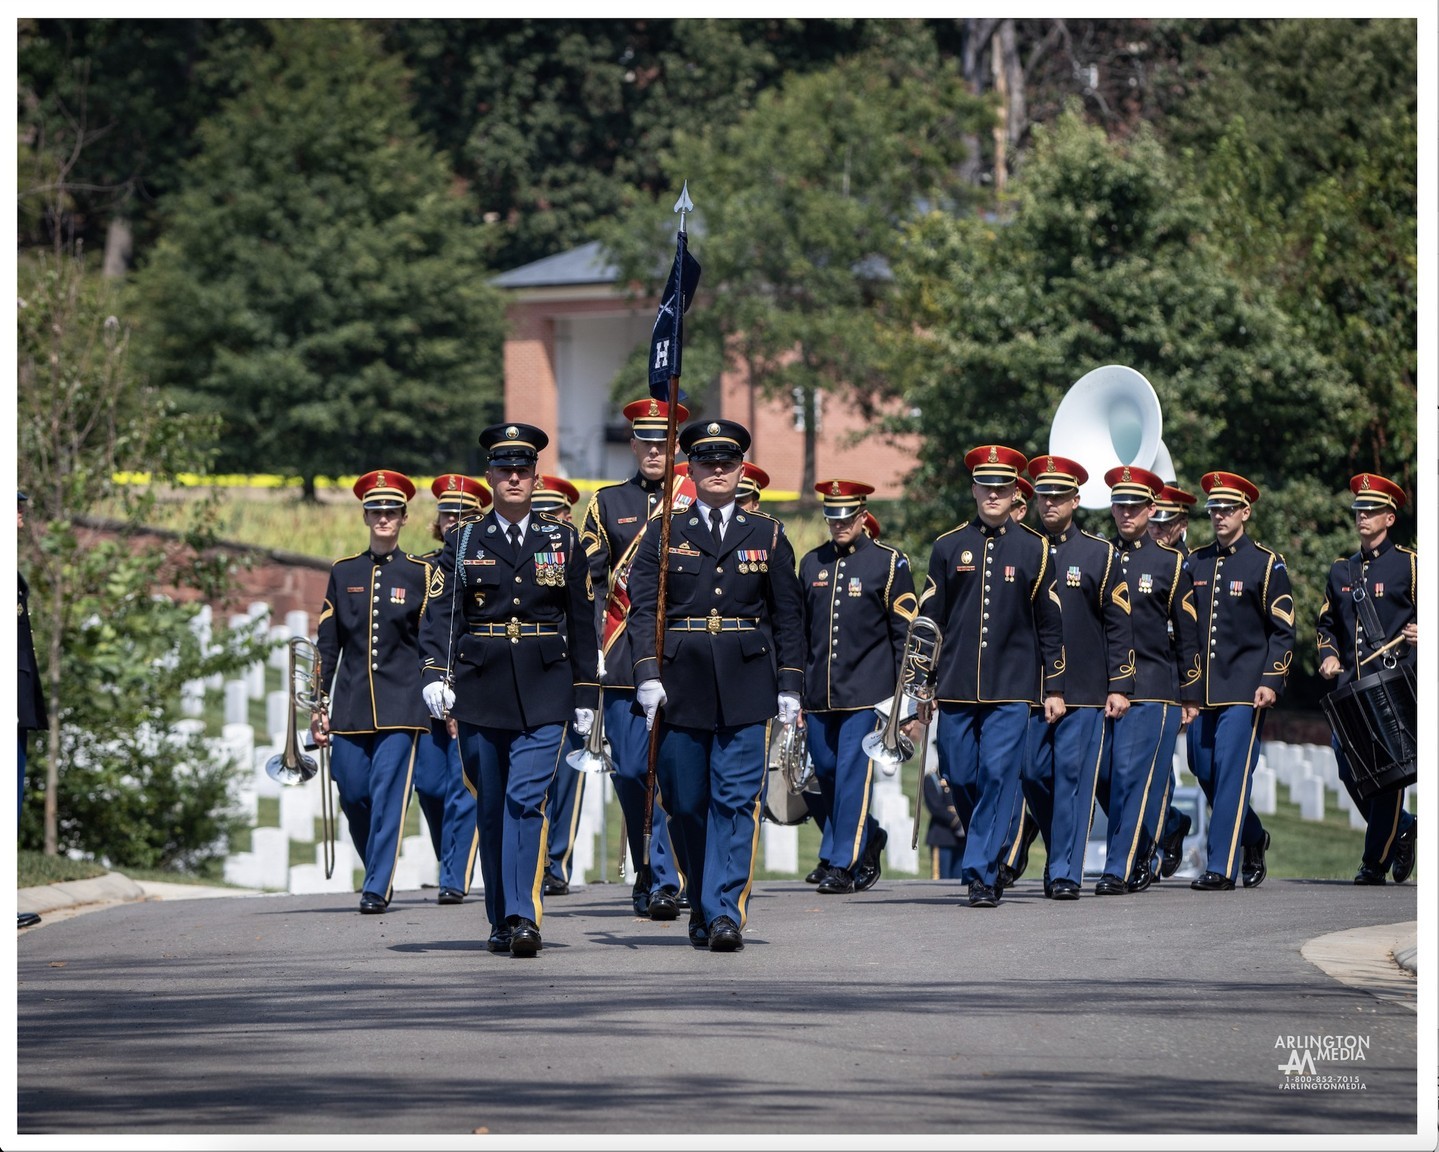 A US Army escort commander leads the escort platoon and @usarmyband to the graveside site during a full honors service in Arlington National Cemetery in Arlington, Virginia.